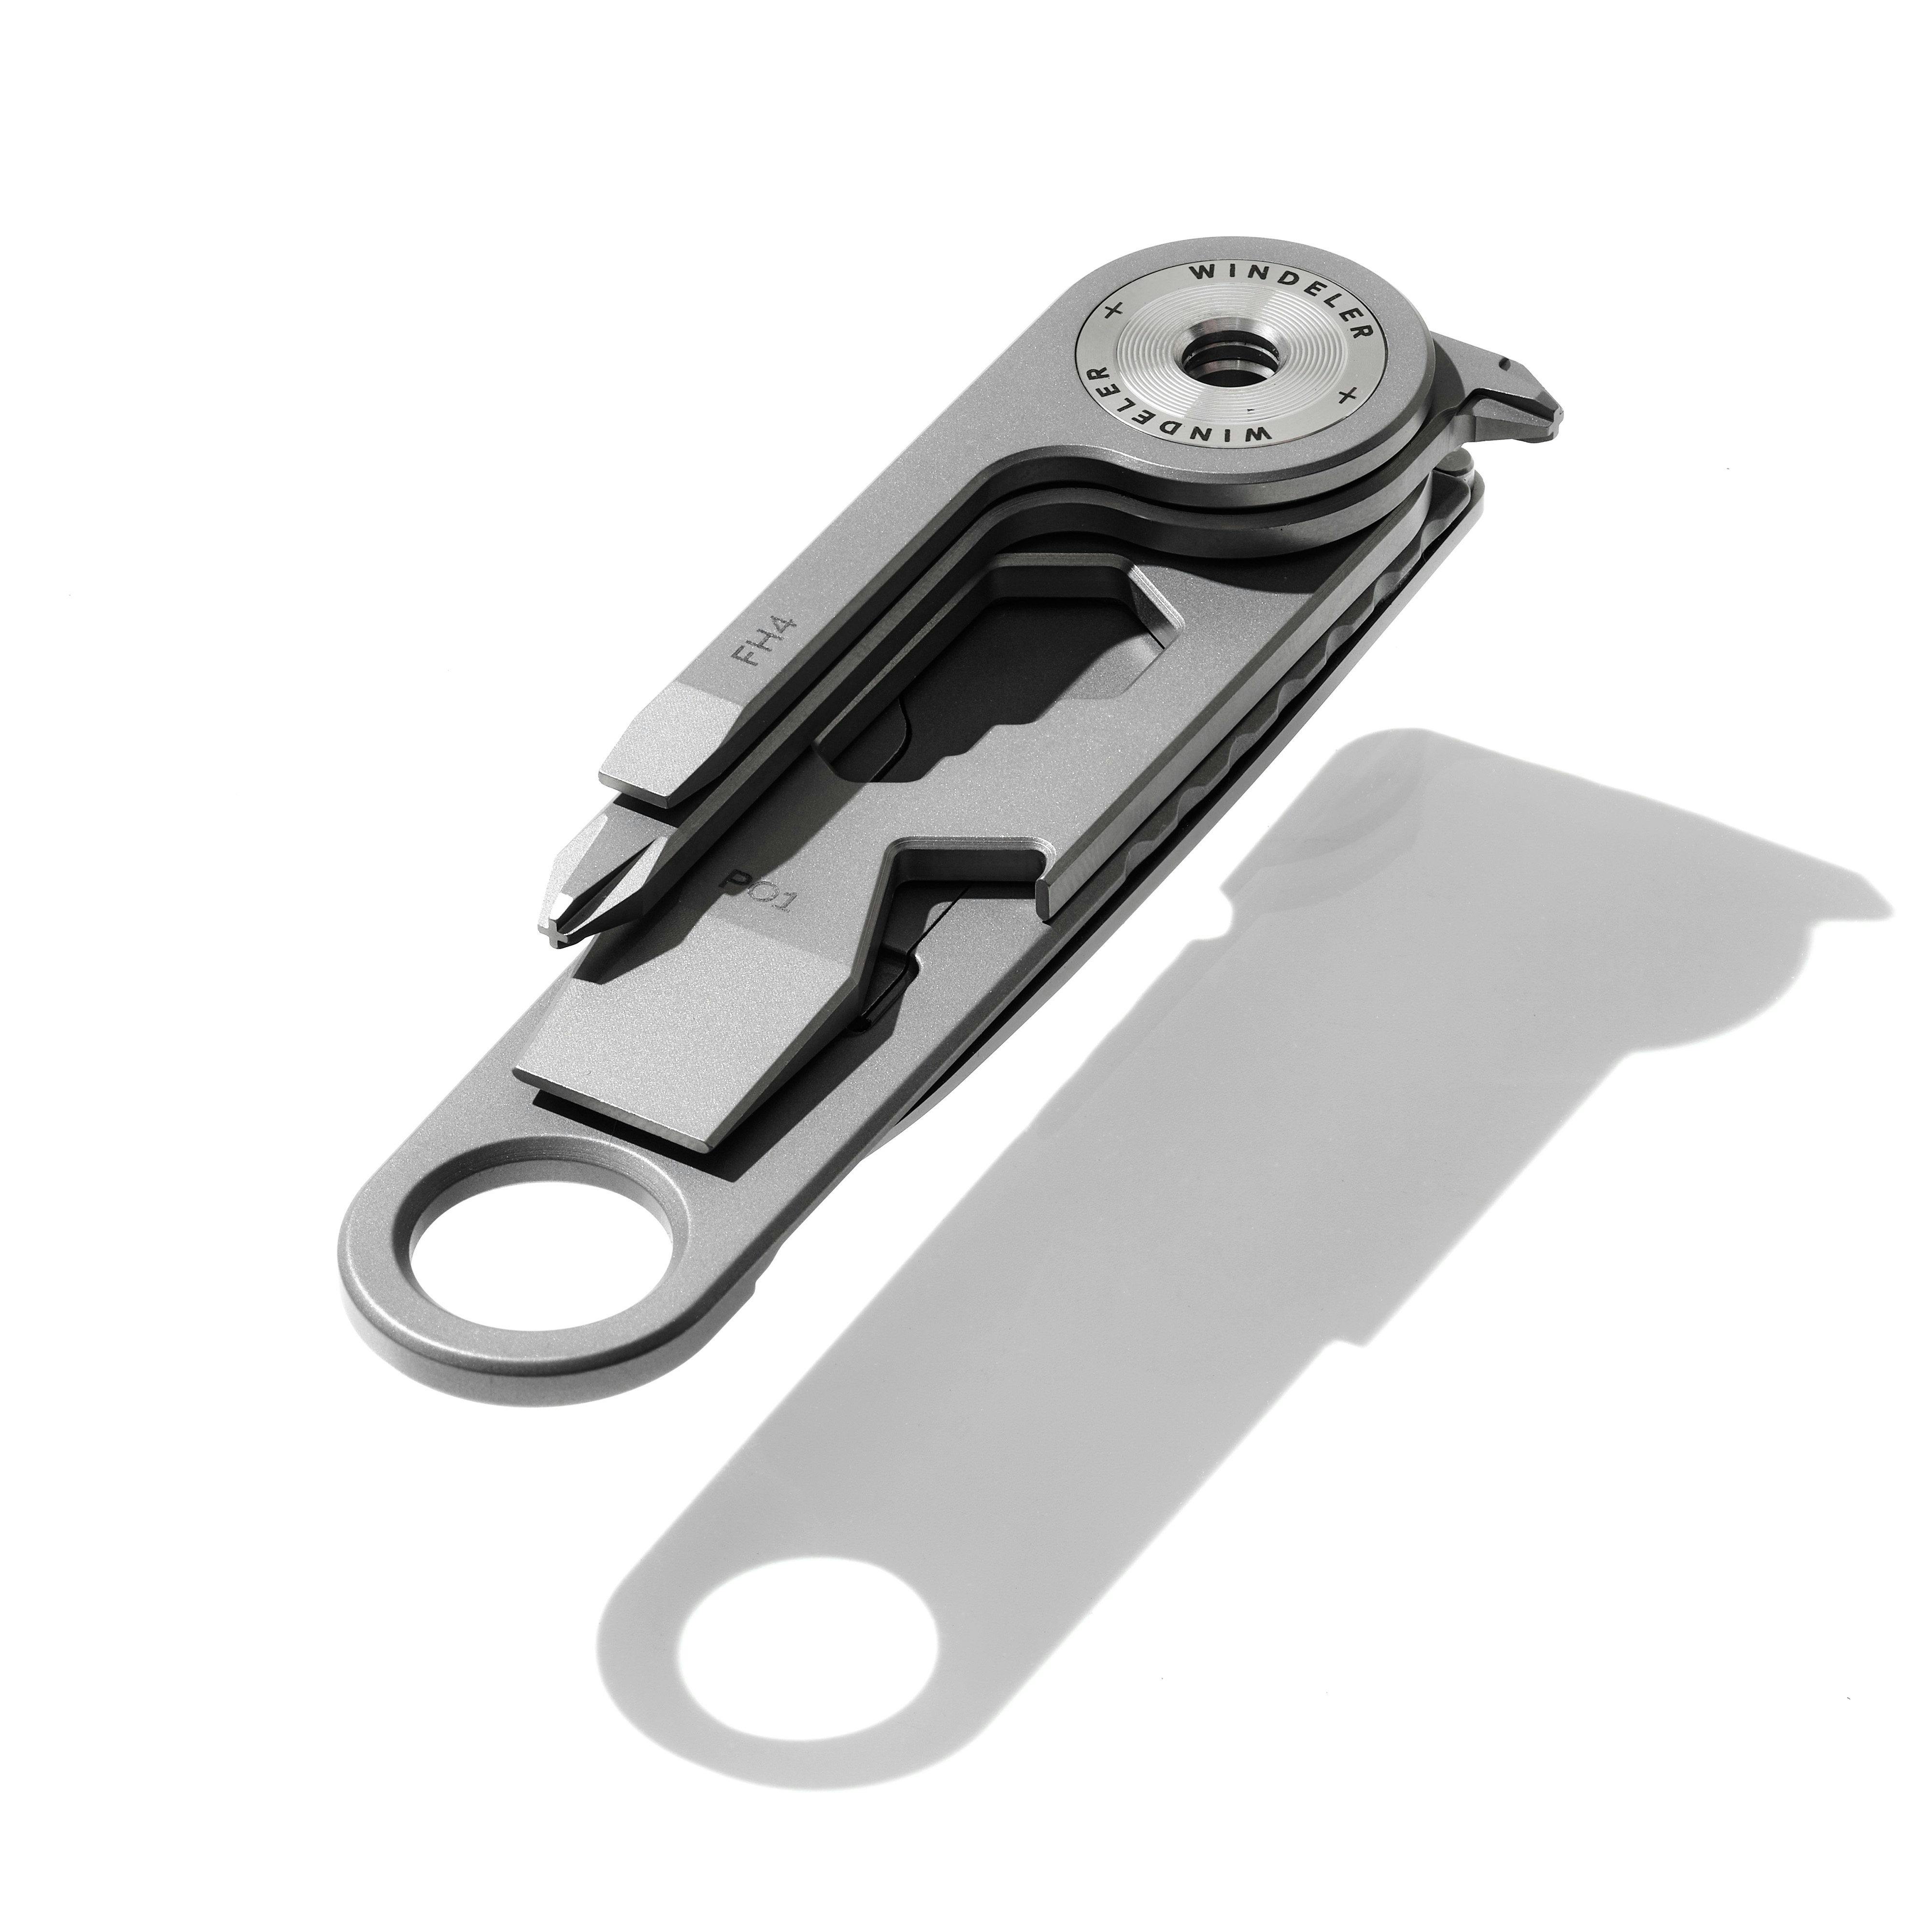 https://huckberry.imgix.net/spree/products/712004/original/83136_Windeler_Extra_Stack_Magnetic_Multi_Tool_Bead_Blasted_Stainless_Steel_02.jpg?auto=format%2C%20compress&crop=top&fit=clip&cs=tinysrgb&ixlib=react-9.5.2